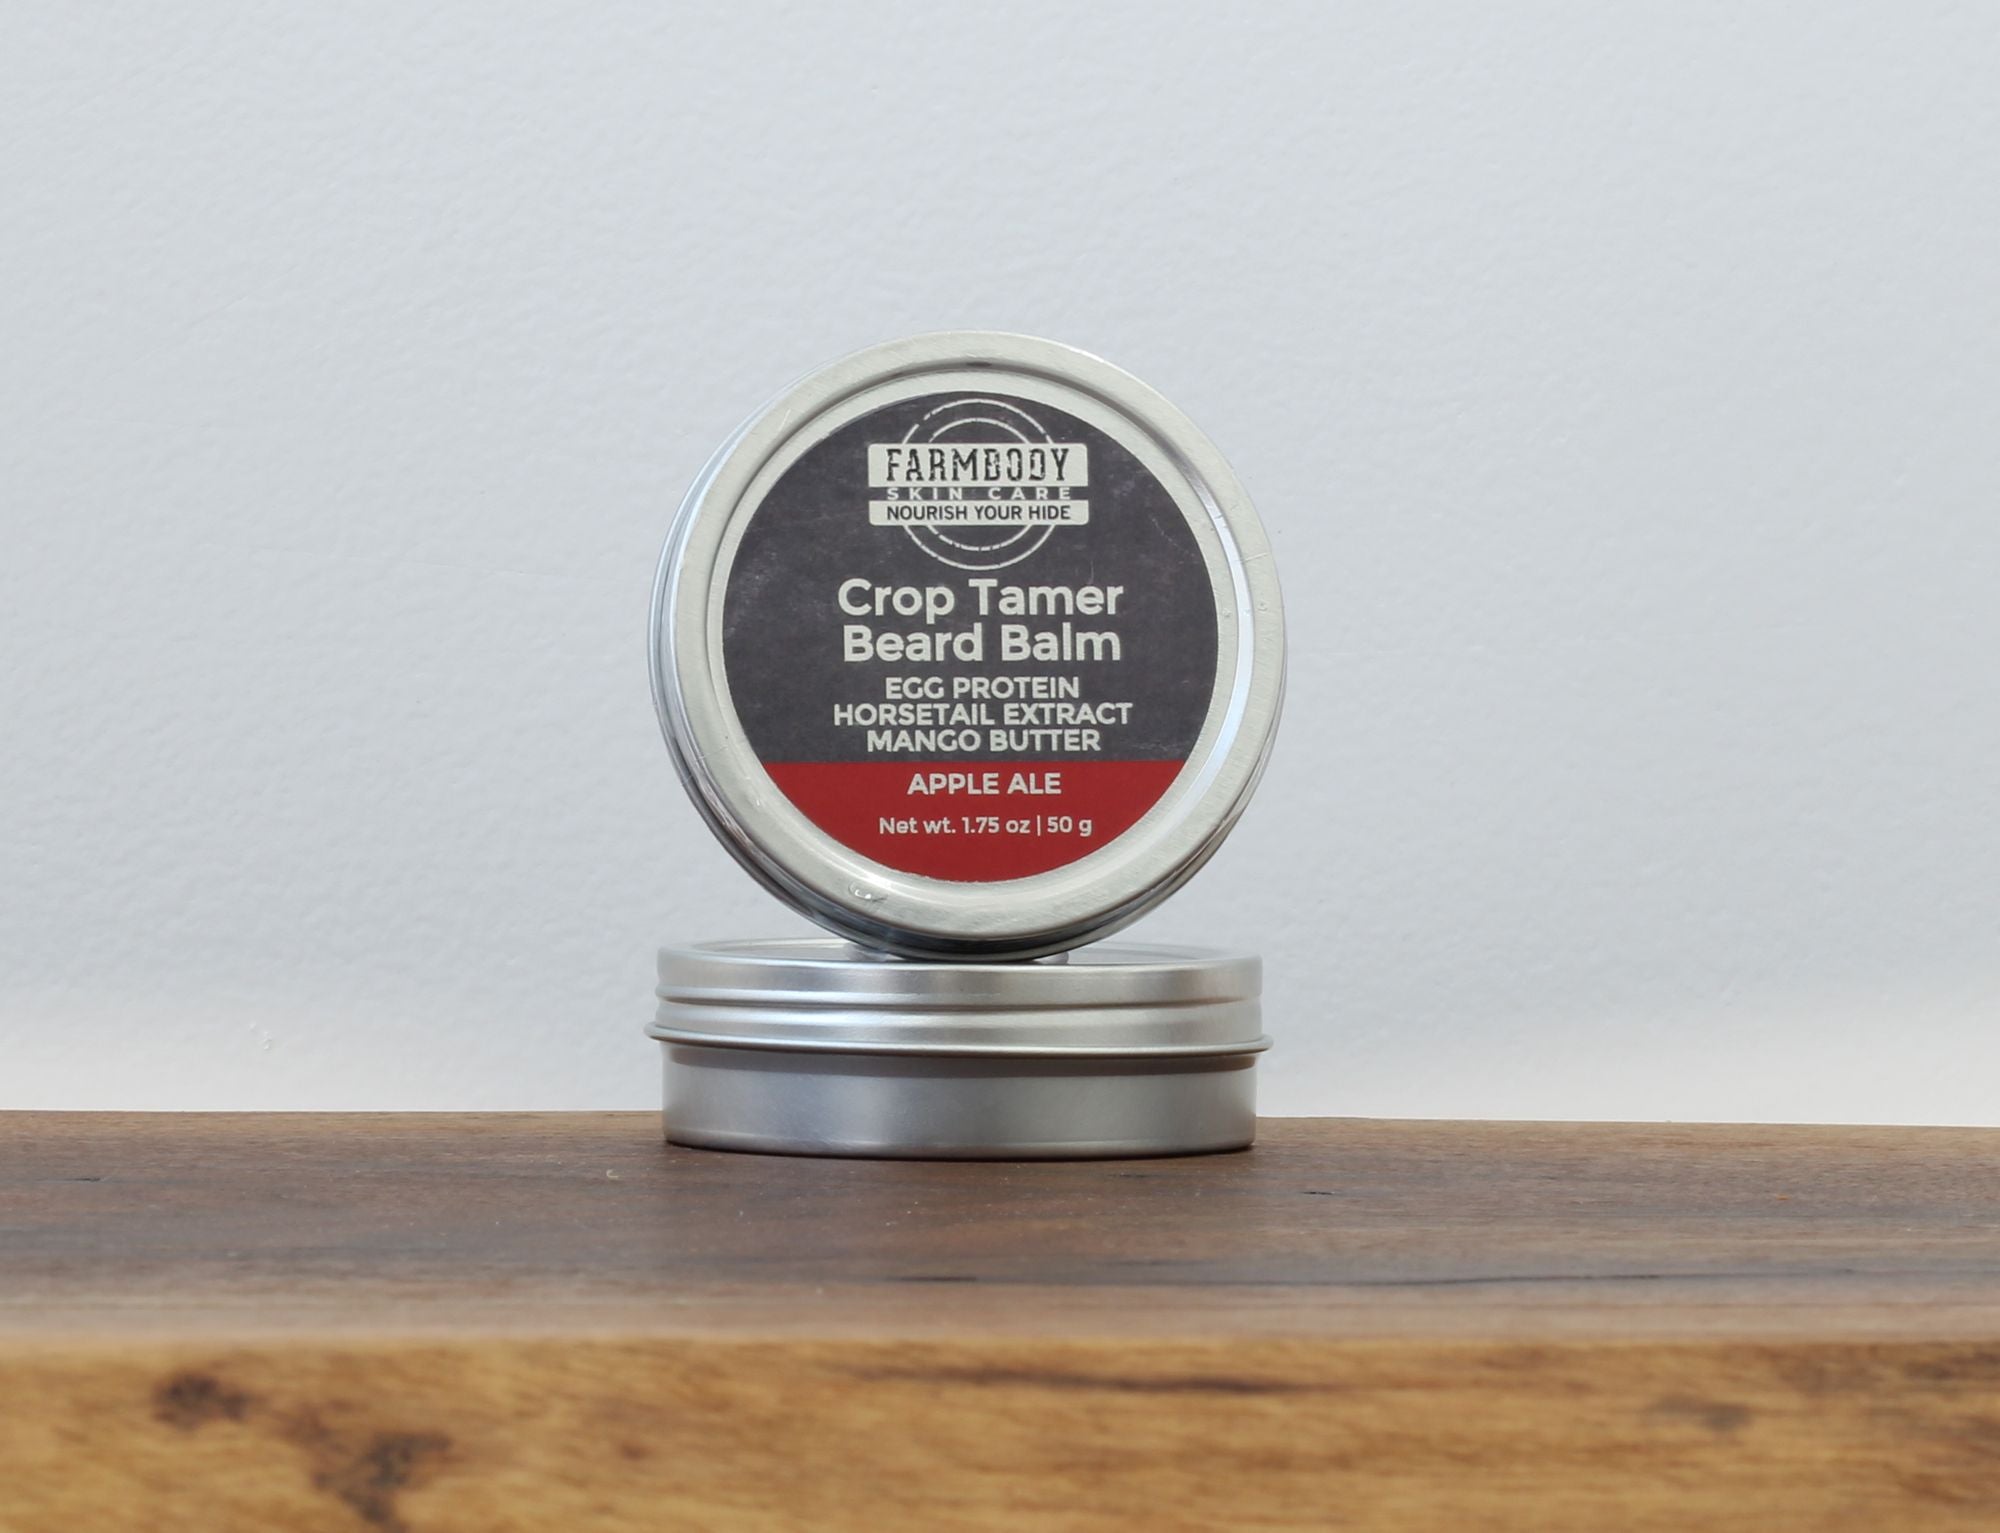 Crop tamer beard balm with egg protein horsetail extract and mango butter for the best way to condition your beard